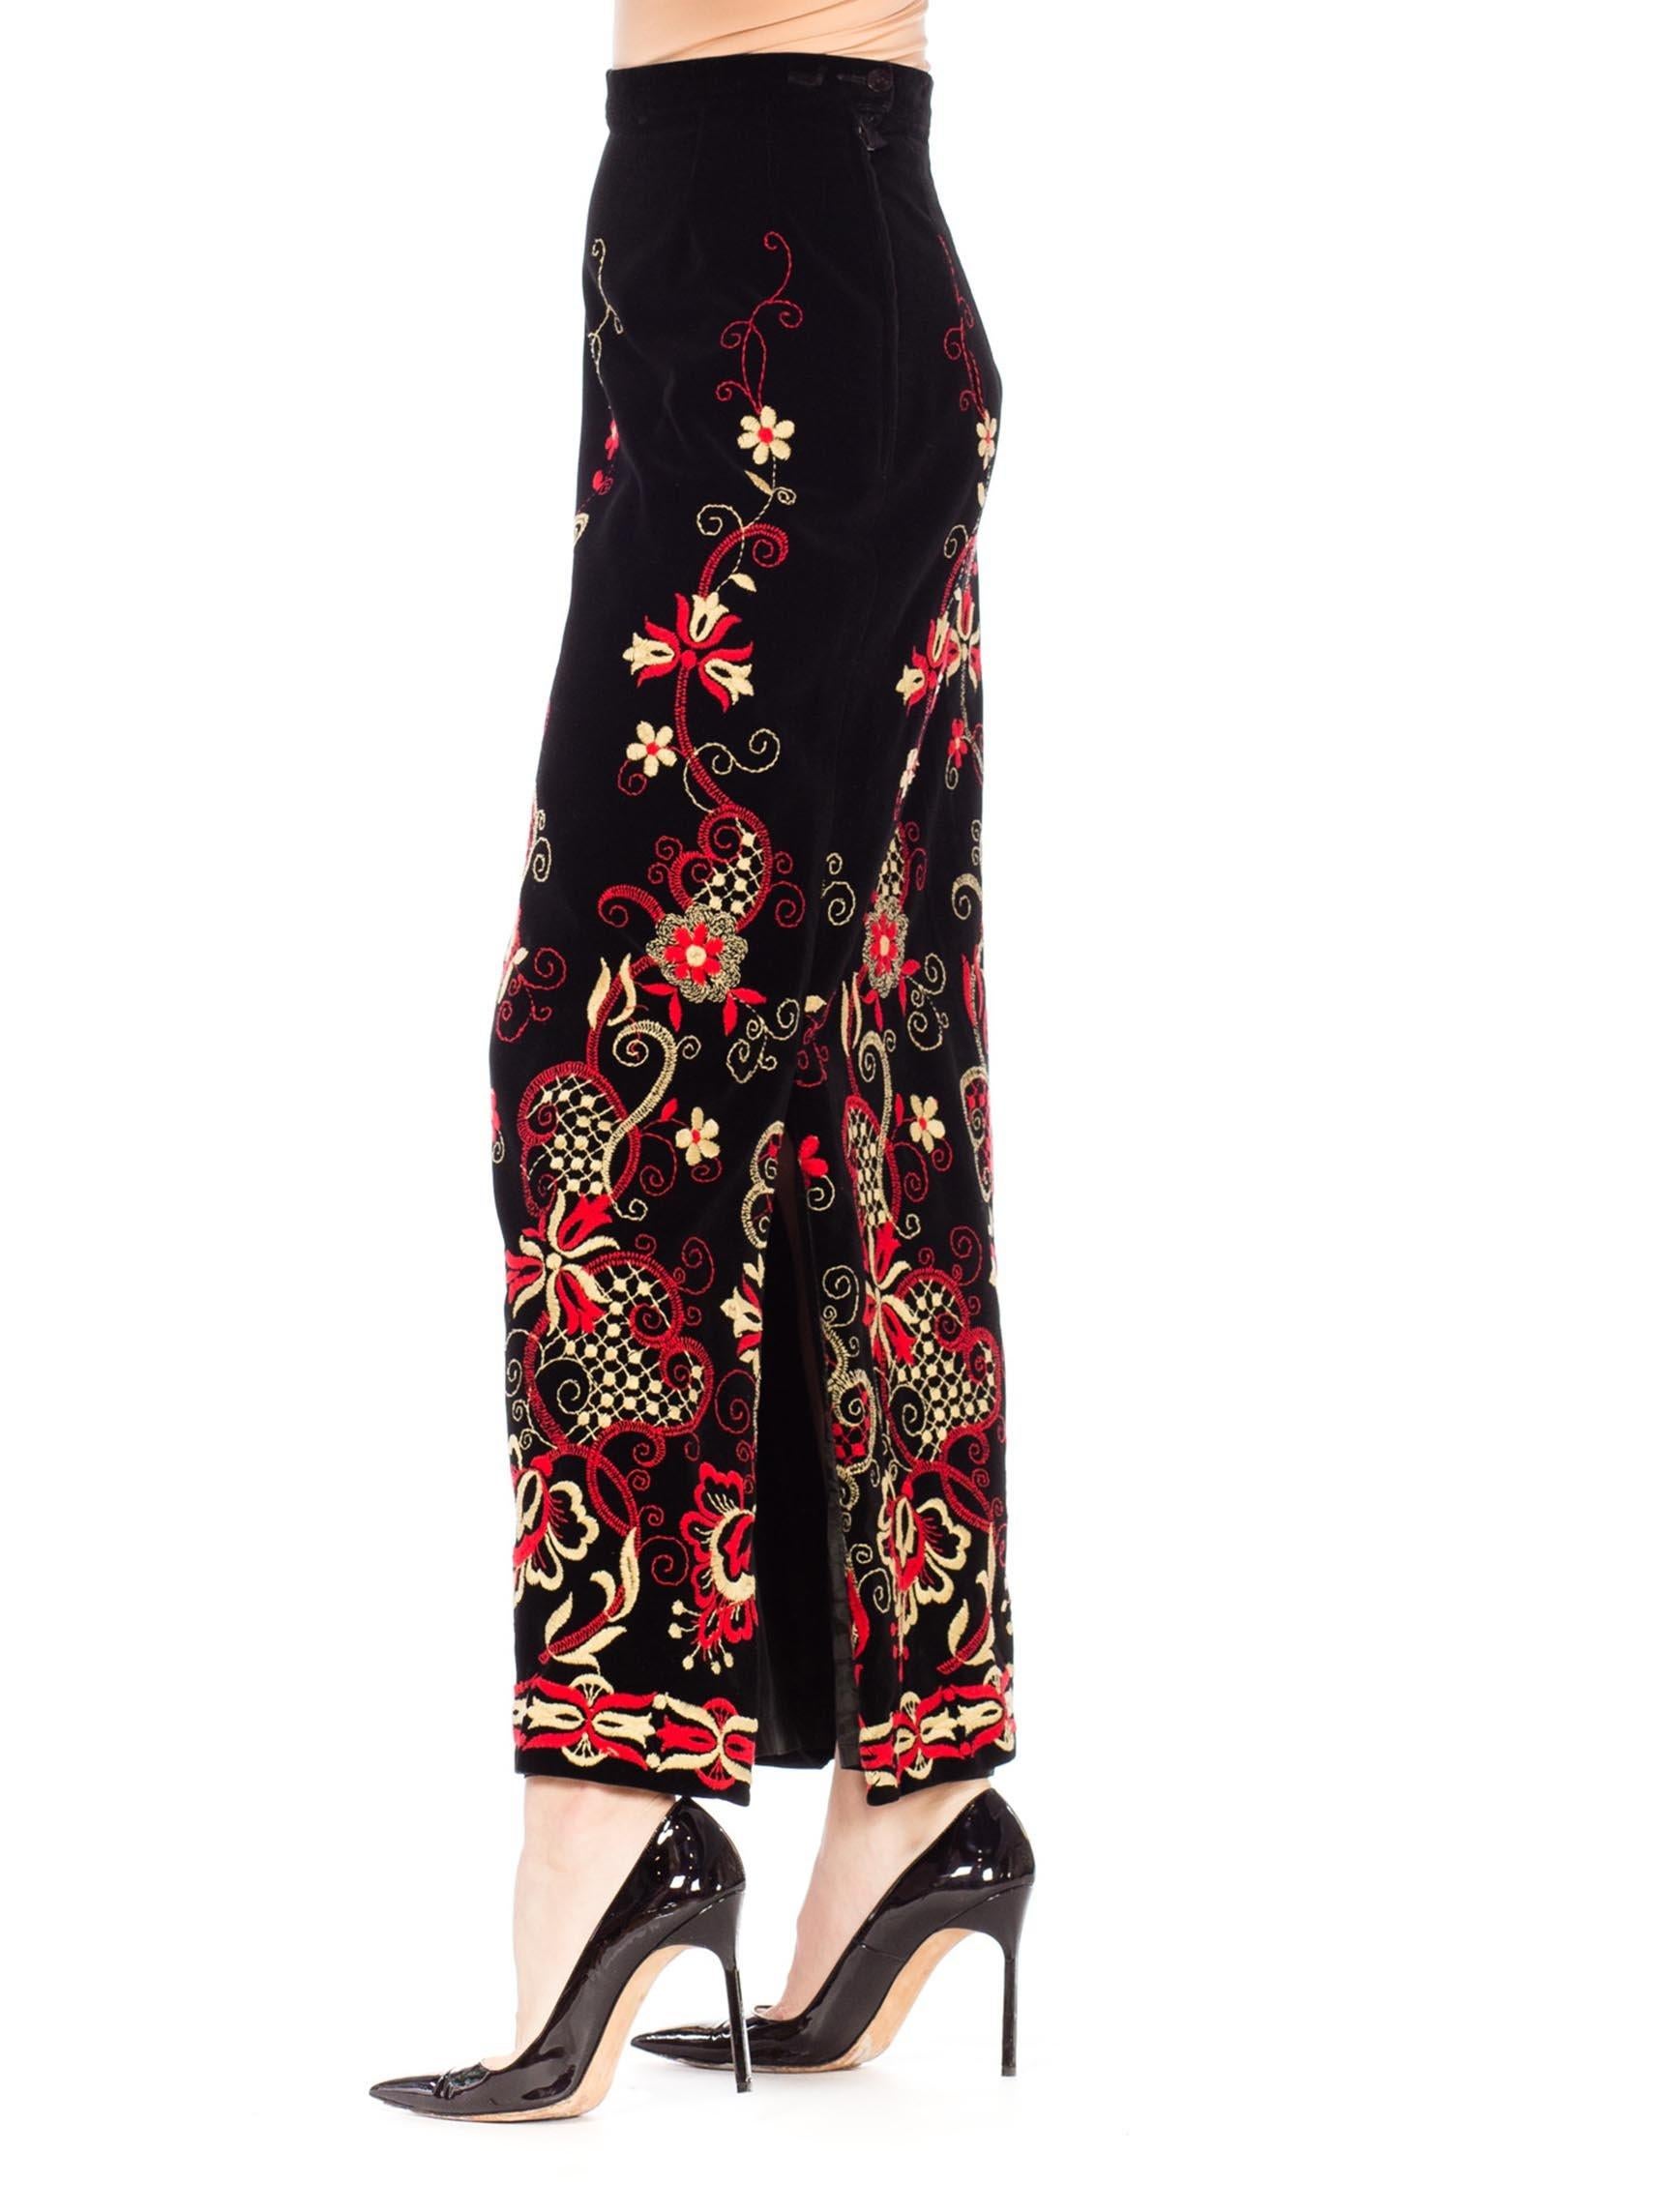 Women's 1960S Black Cotton Velvet Maxi Skirt With Red And White Floral Embroidery